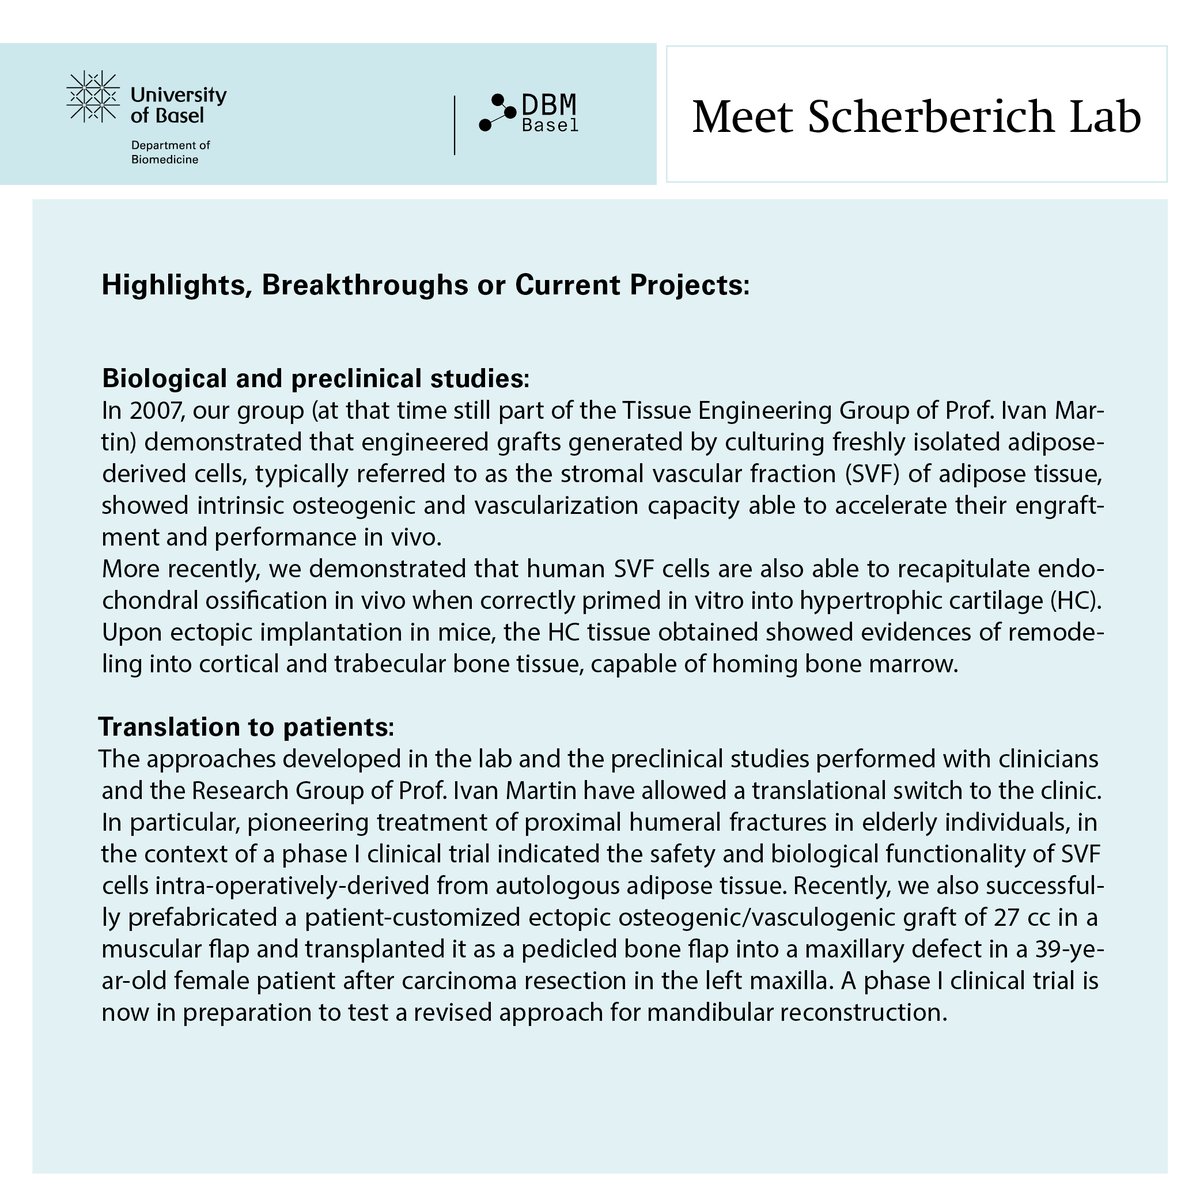 We are delighted to have them with us. Learn more about the Scherberich Lab. #teamDBMBasel #teamwork #boneregeneration #vascularizedbone #research